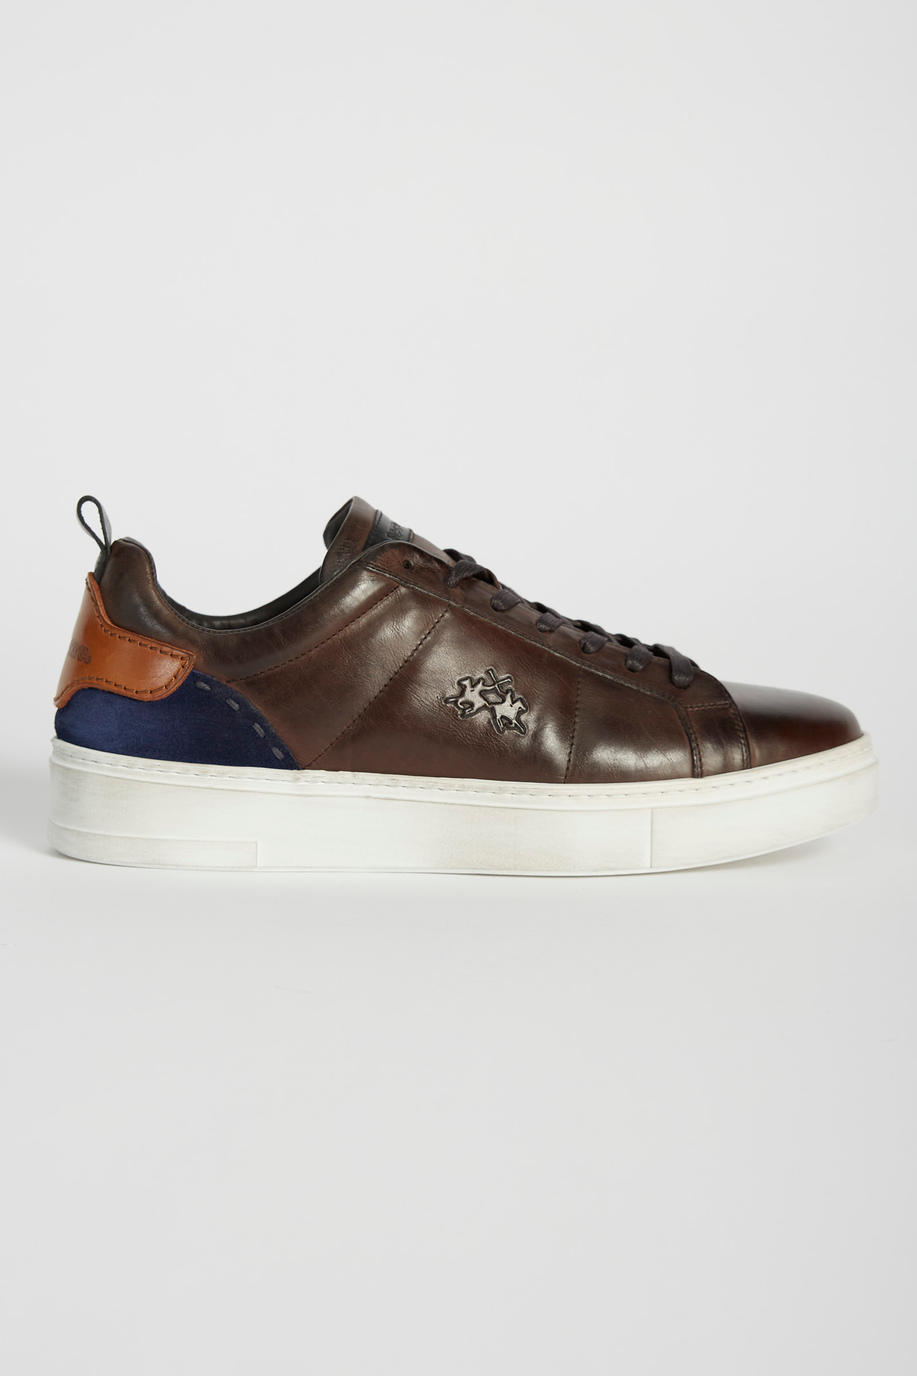 Suede leather trainers - Casual wear | La Martina - Official Online Shop